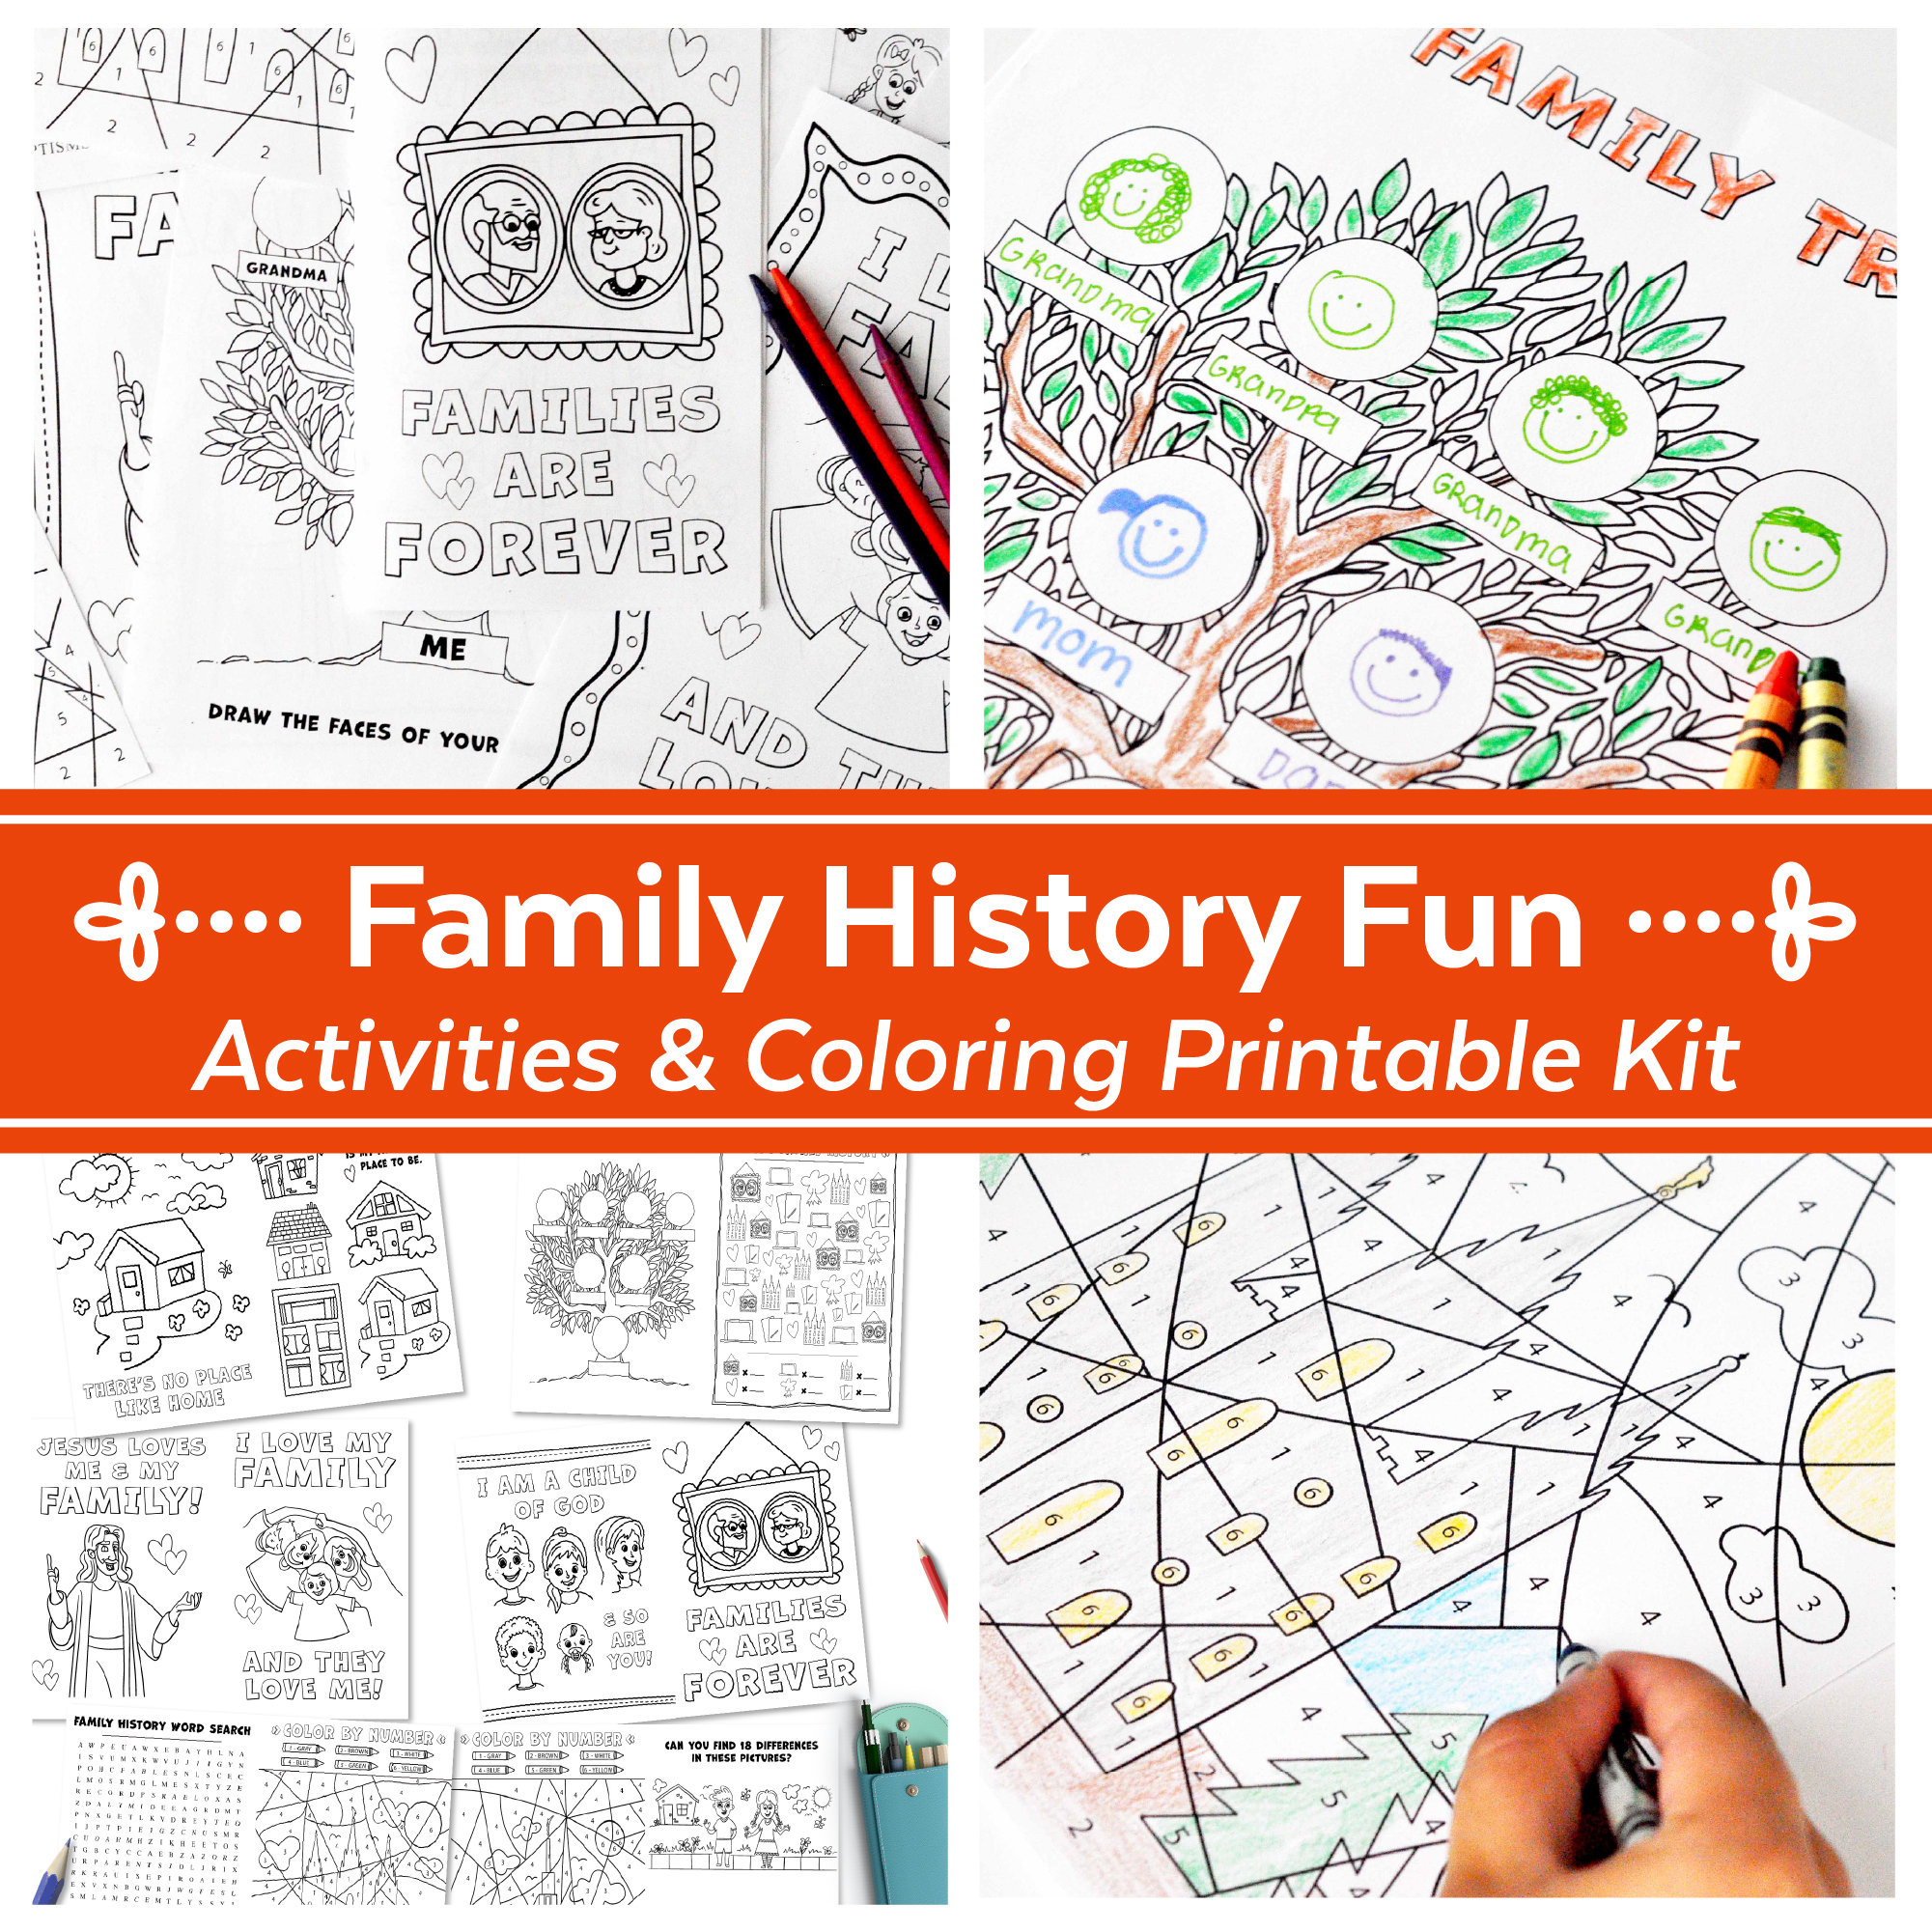 7 Generation Editable Family History Book Template Ancestry Book